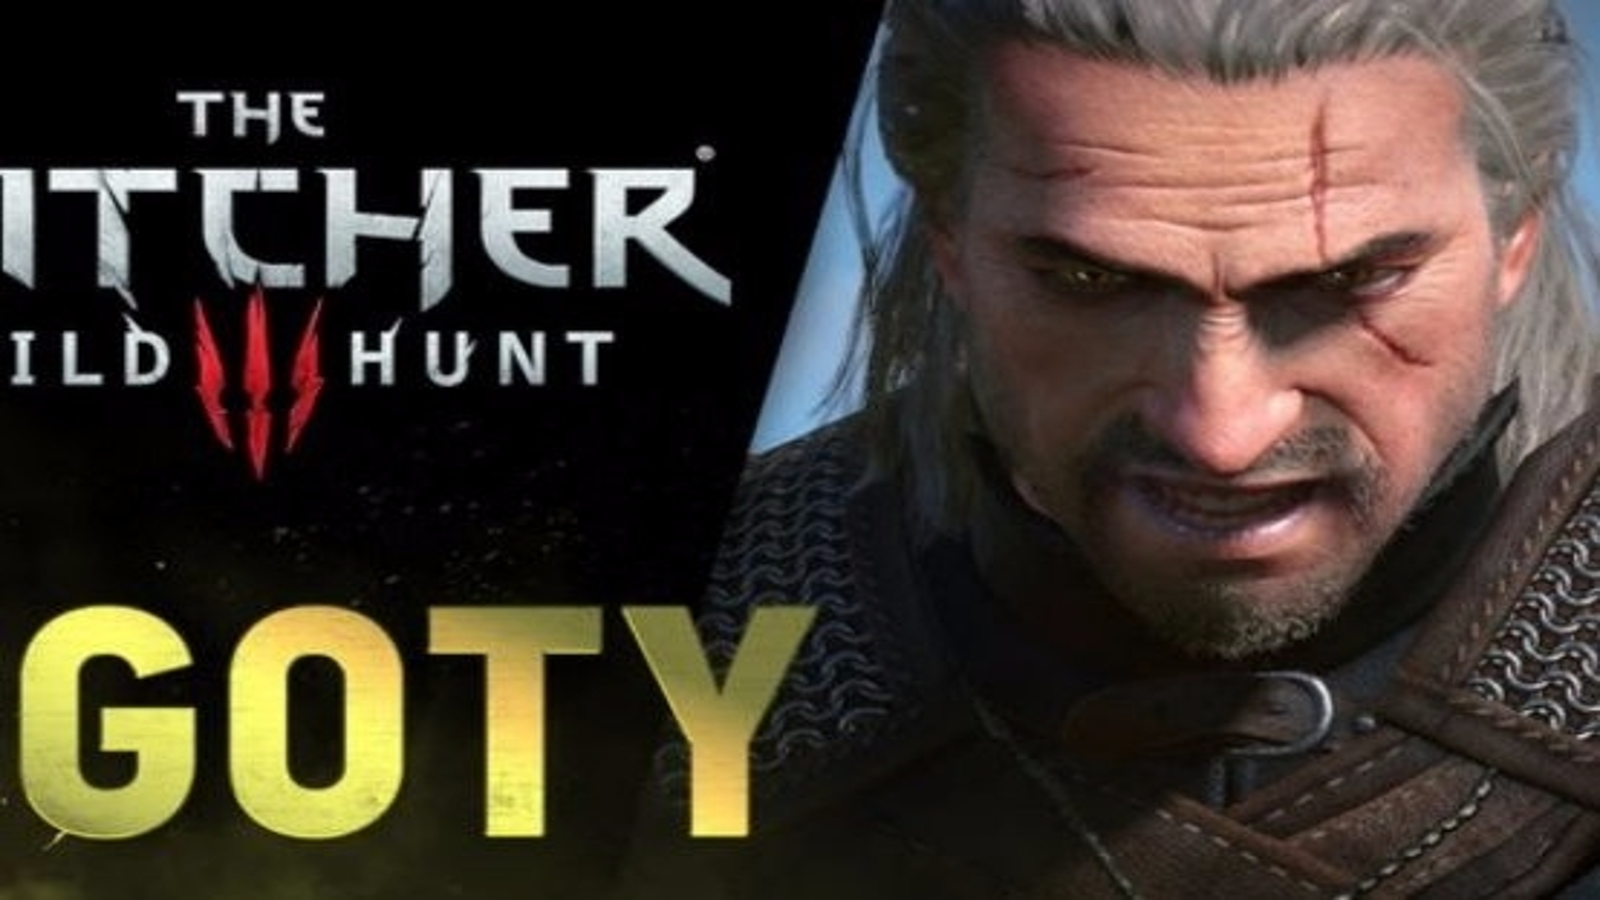 The Witcher 3 Is Releasing A Game Of The Year Edition - mxdwn Games